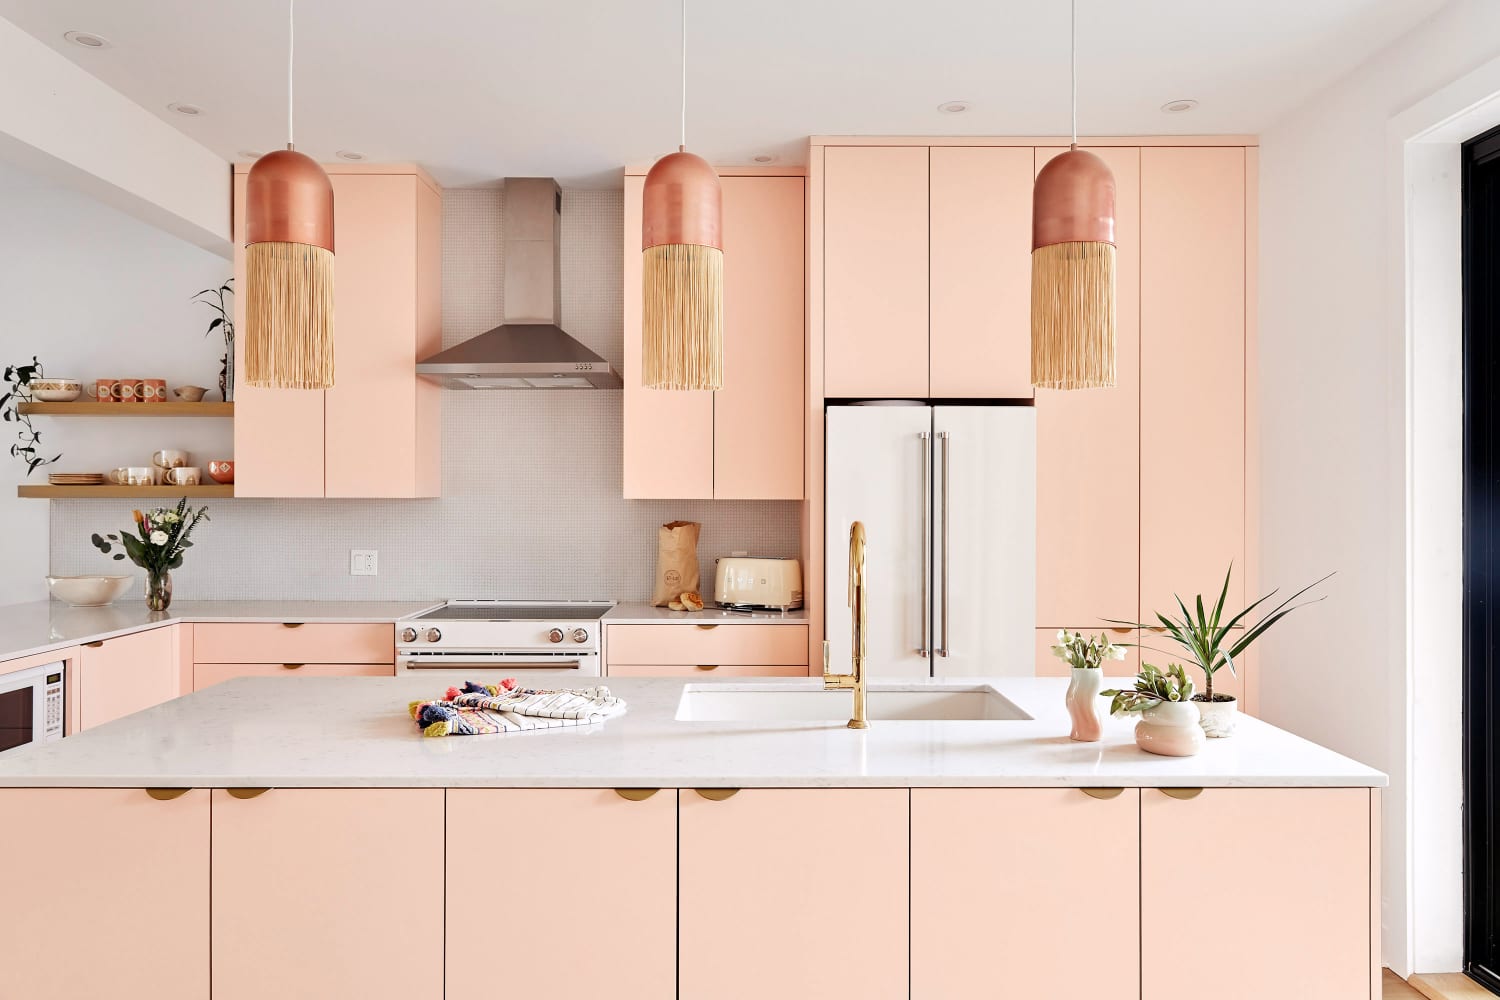 27 Pink Kitchen Ideas That’ll Add Personality to Your Home | Apartment ...